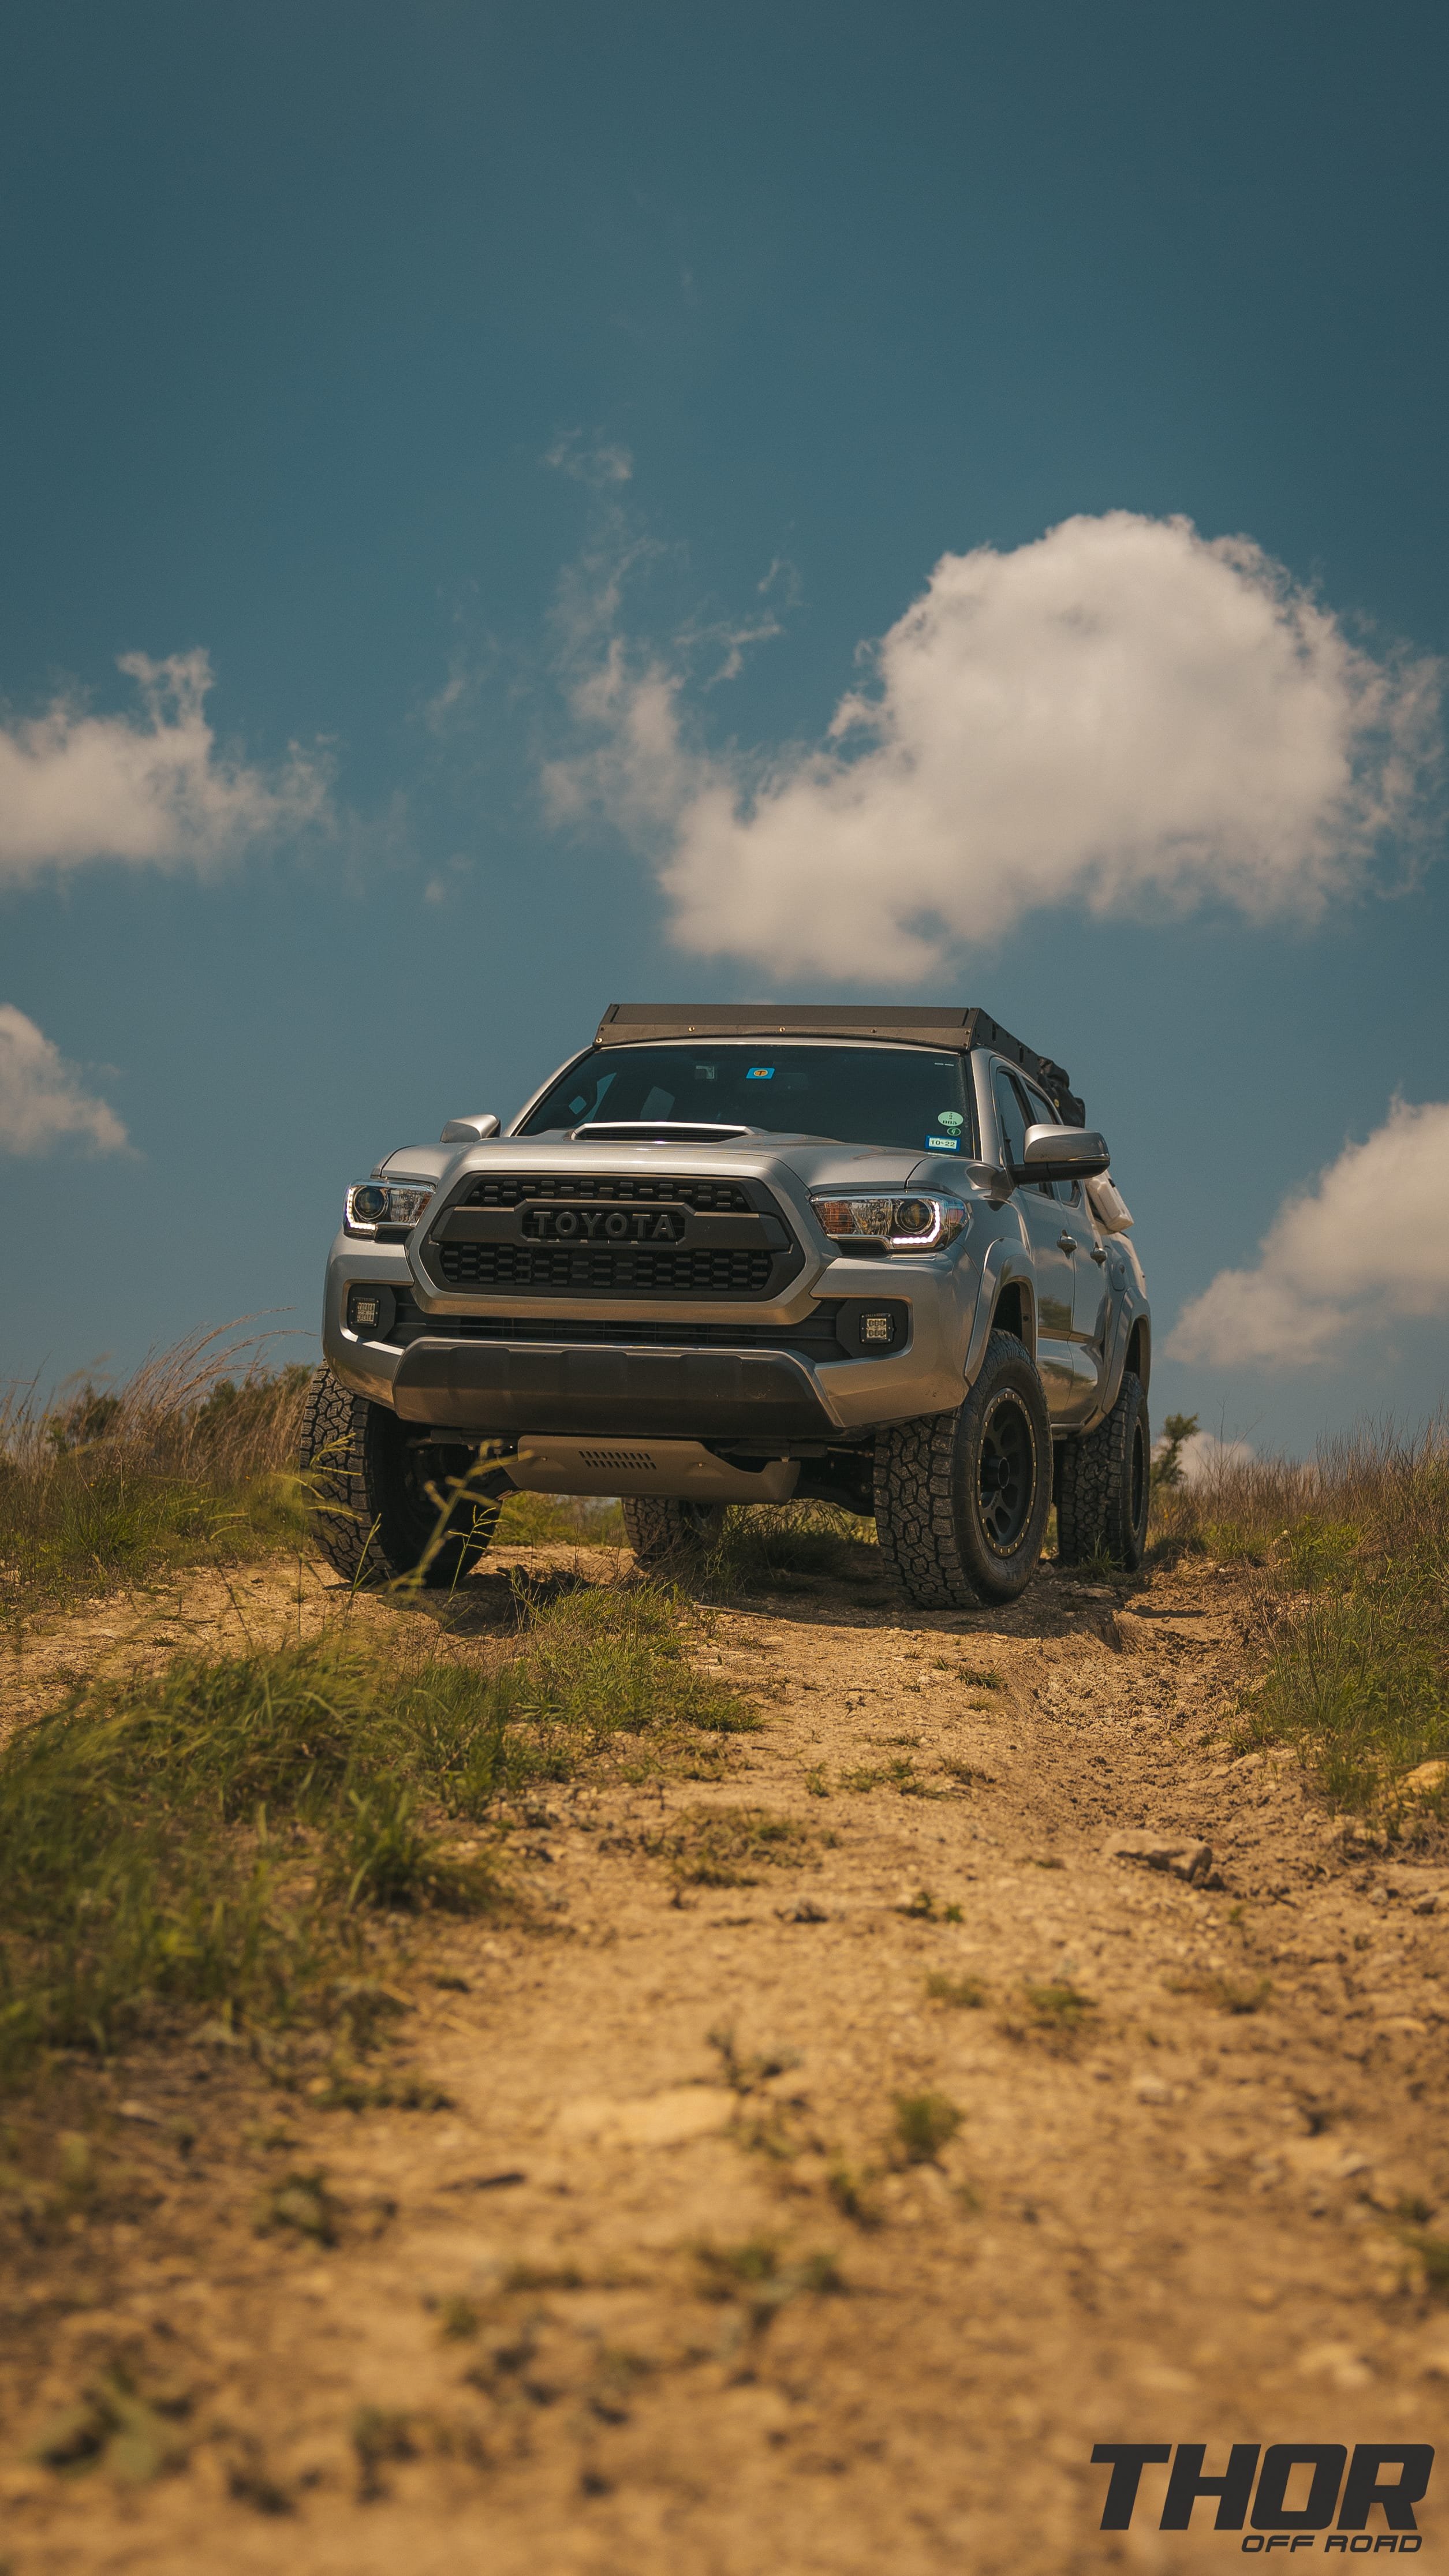 2016 Toyota Tacoma TRD Sport in Silver with 3" Icon Dynamics Stage 8 Suspension Kit, 285/70R17 Toyo Tires, 17" Method 305NV Wheels, CBI Roof Rack, Smitty Built Tent and Cover, RotoPax and MaxxTrax, Rigid Fog Light Kit